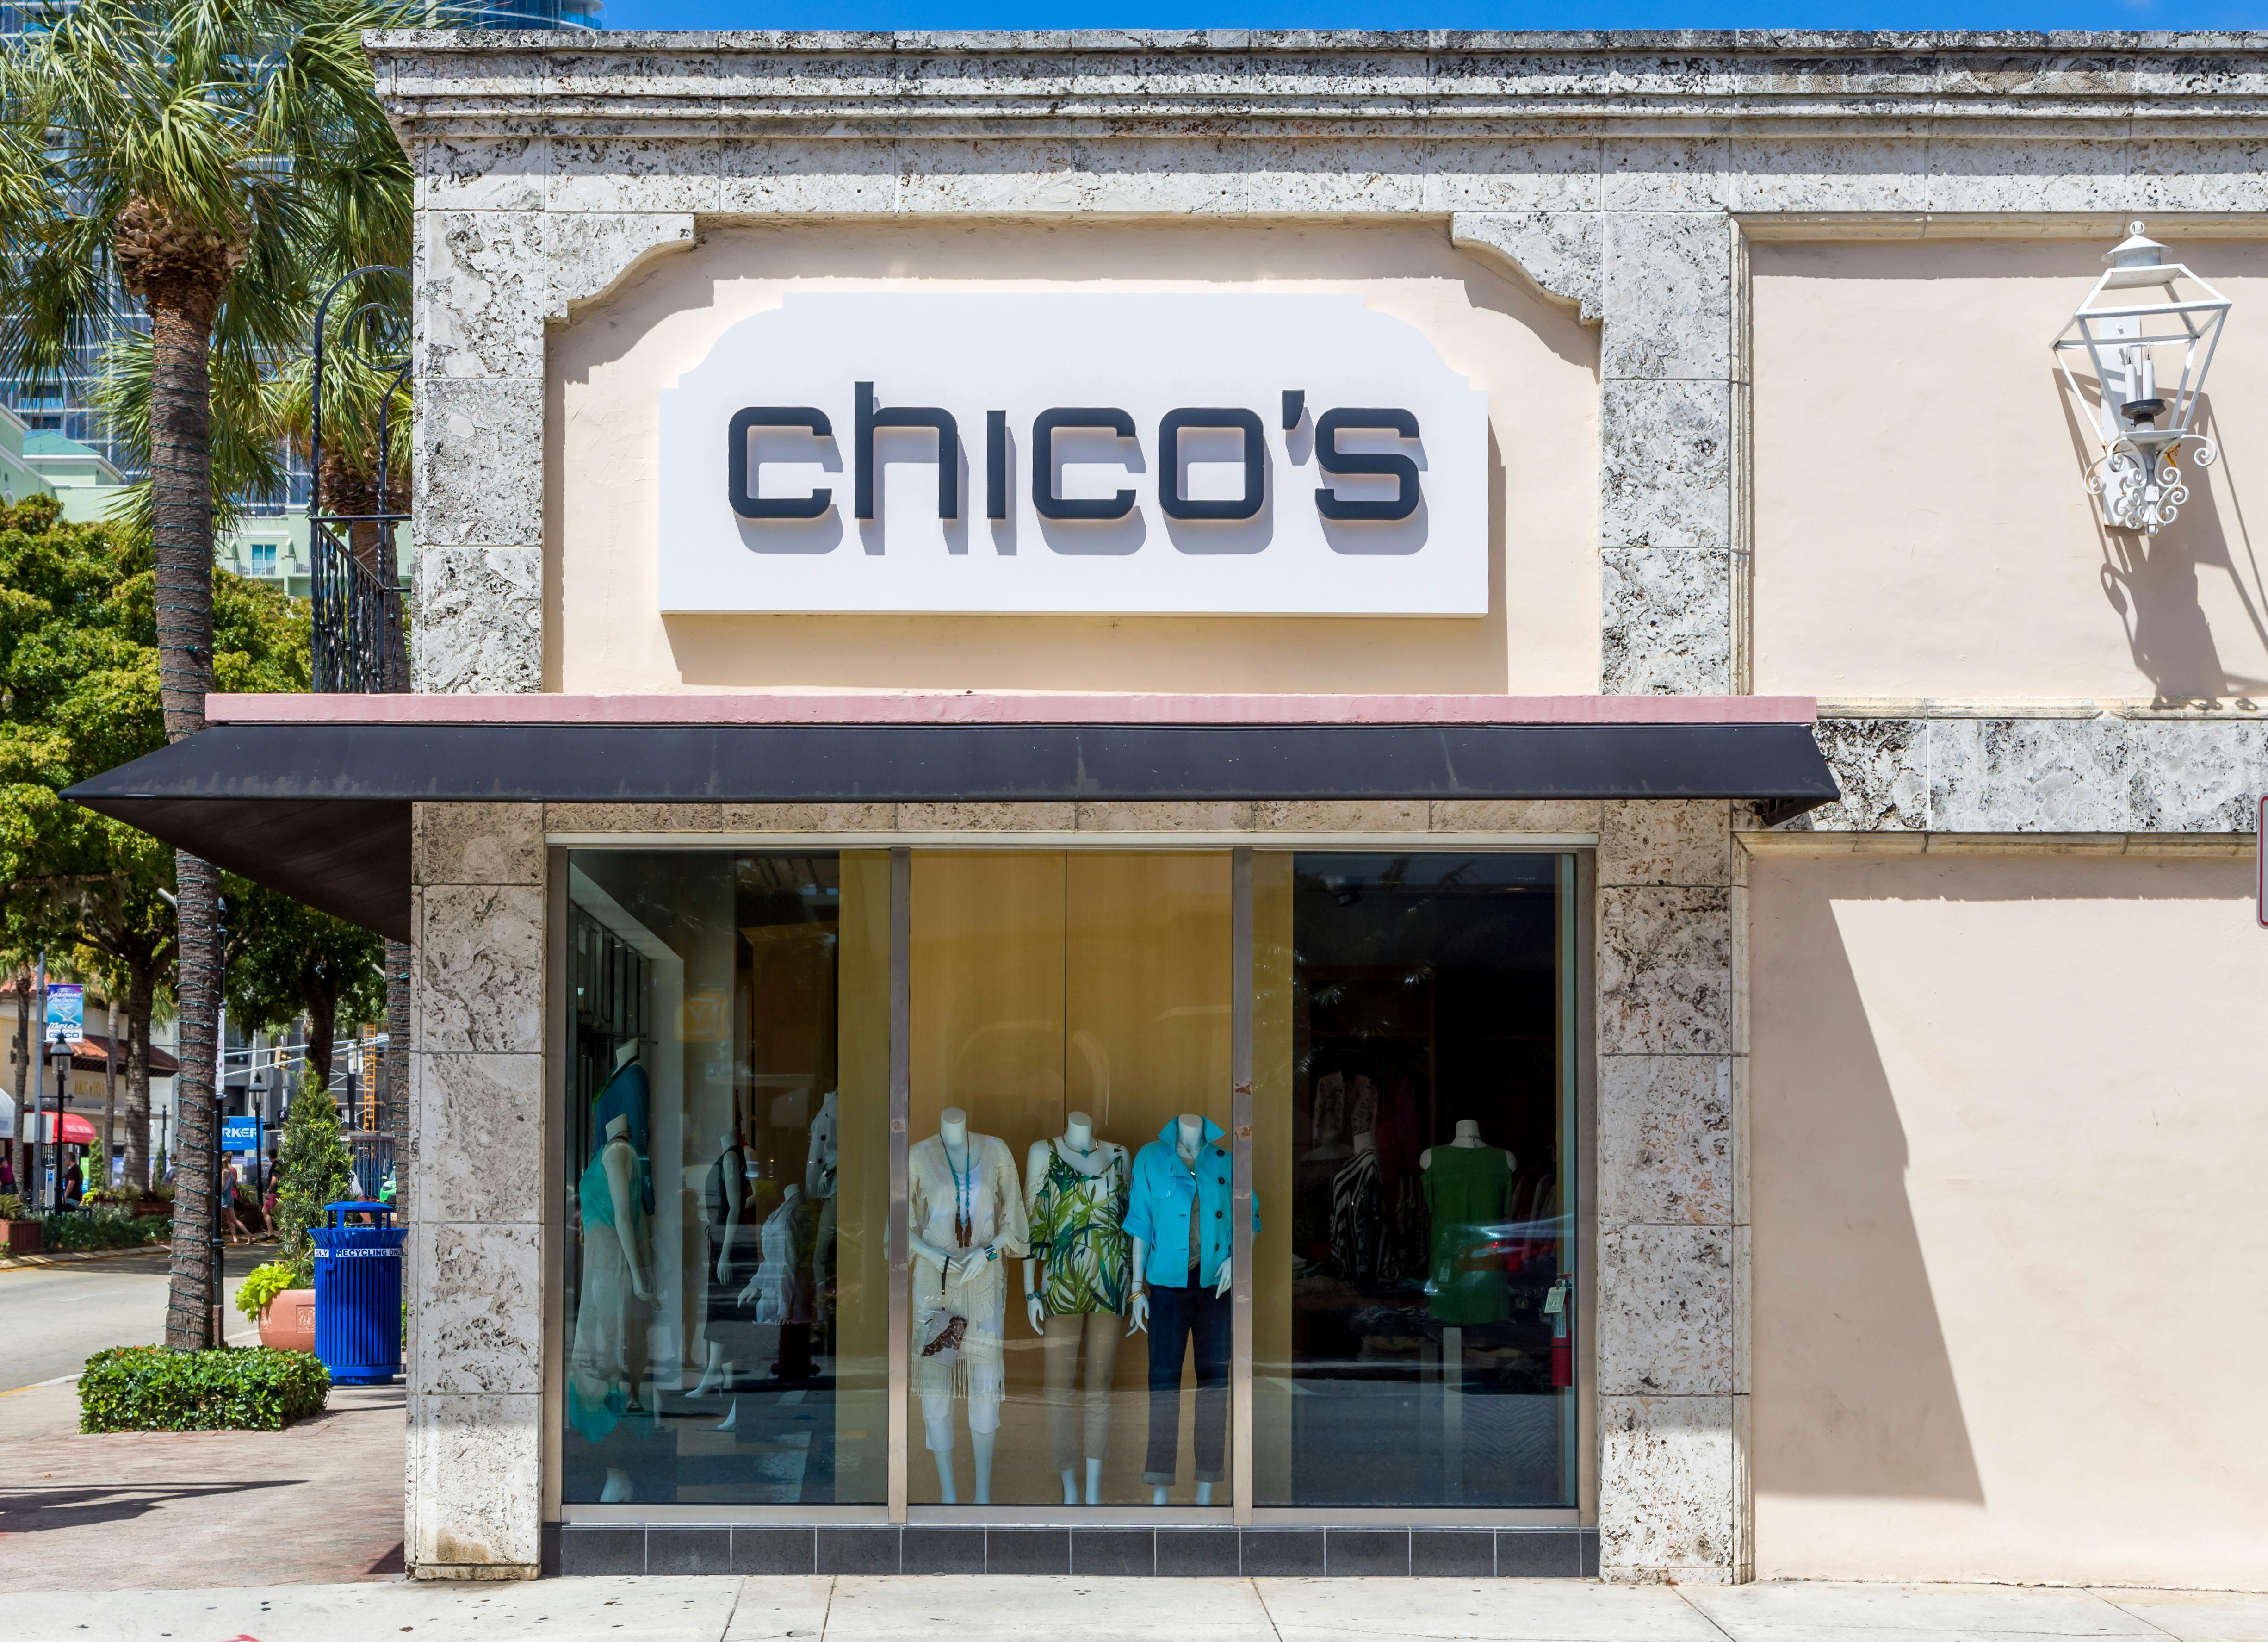 Chico's retail store location, store front.